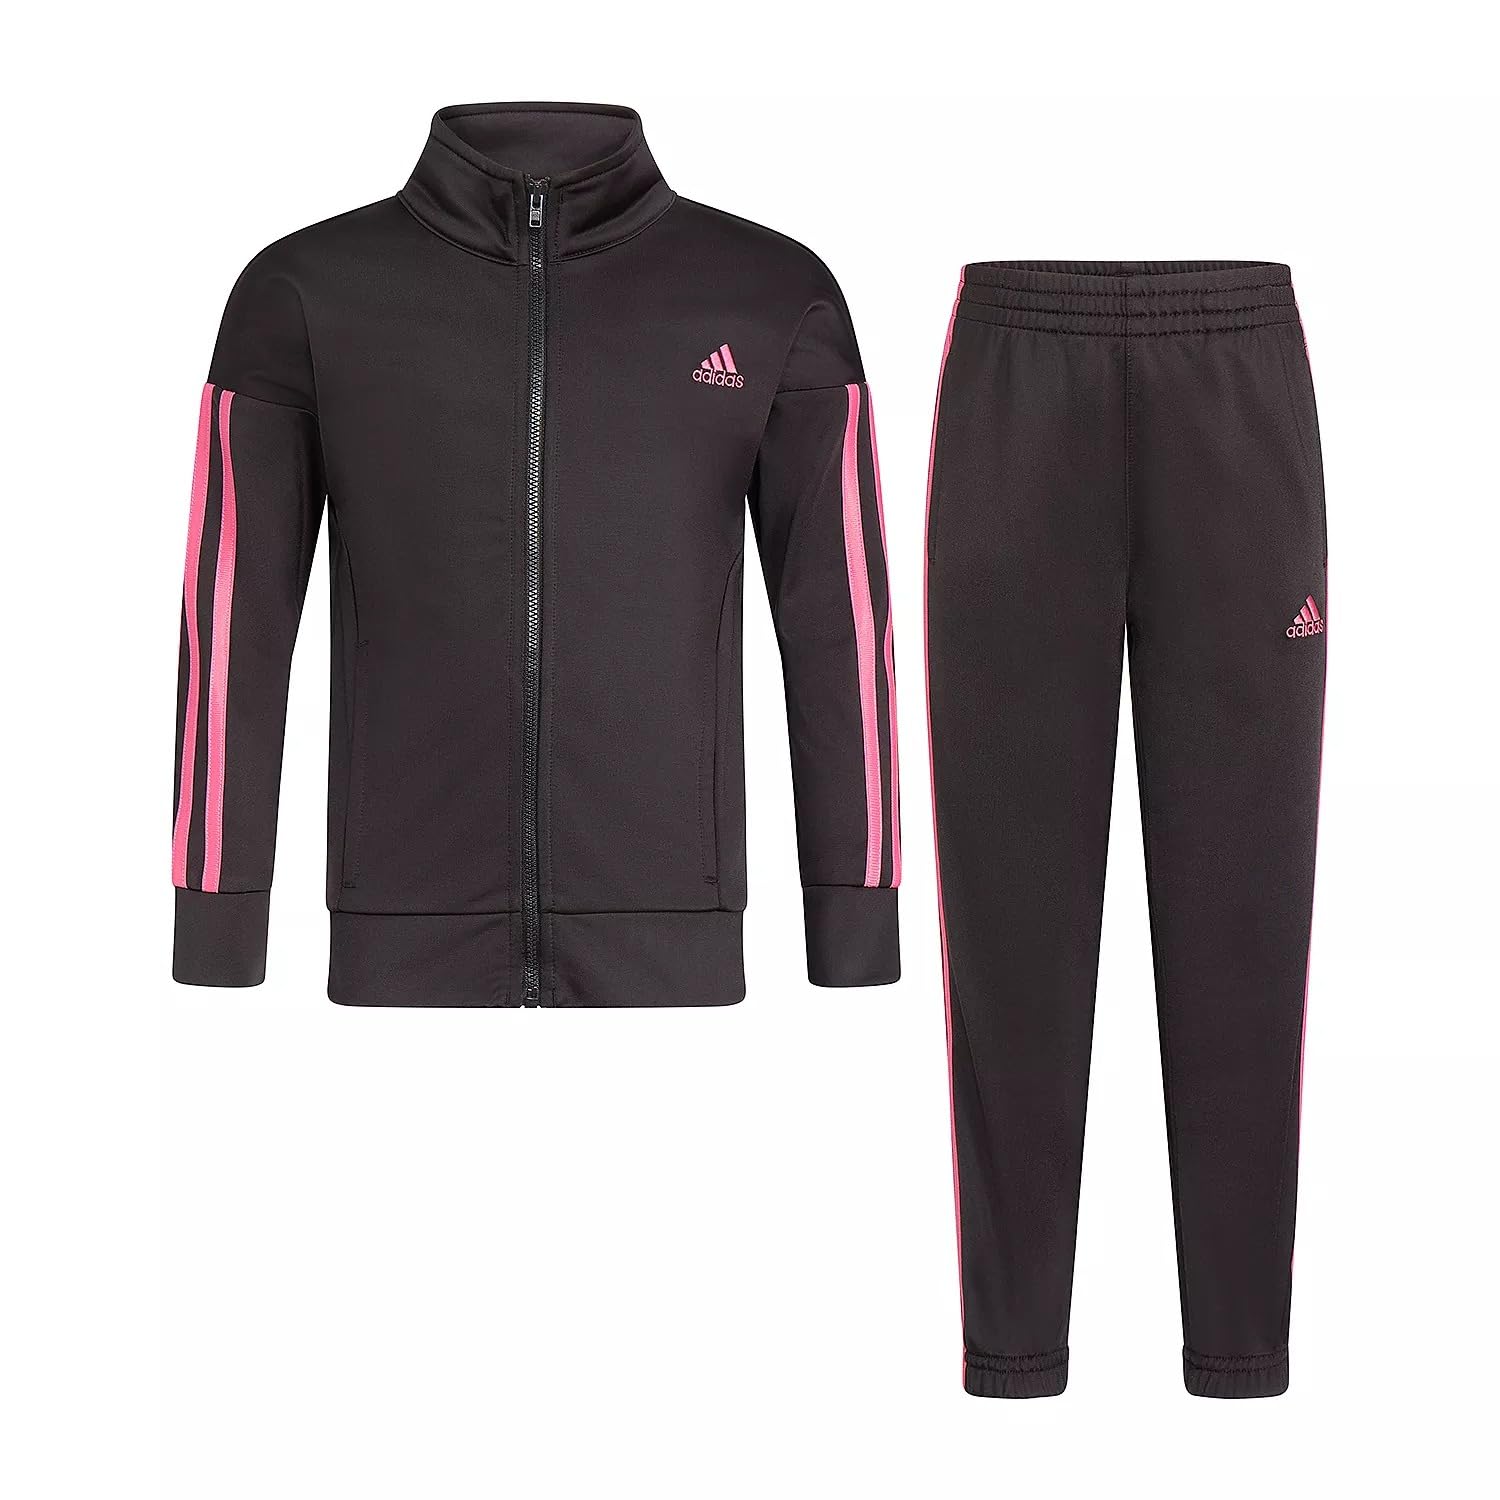 adidas Girls Zip Front Classic Tricot Jacket and Joggers Set, Black/Light Pink, 5